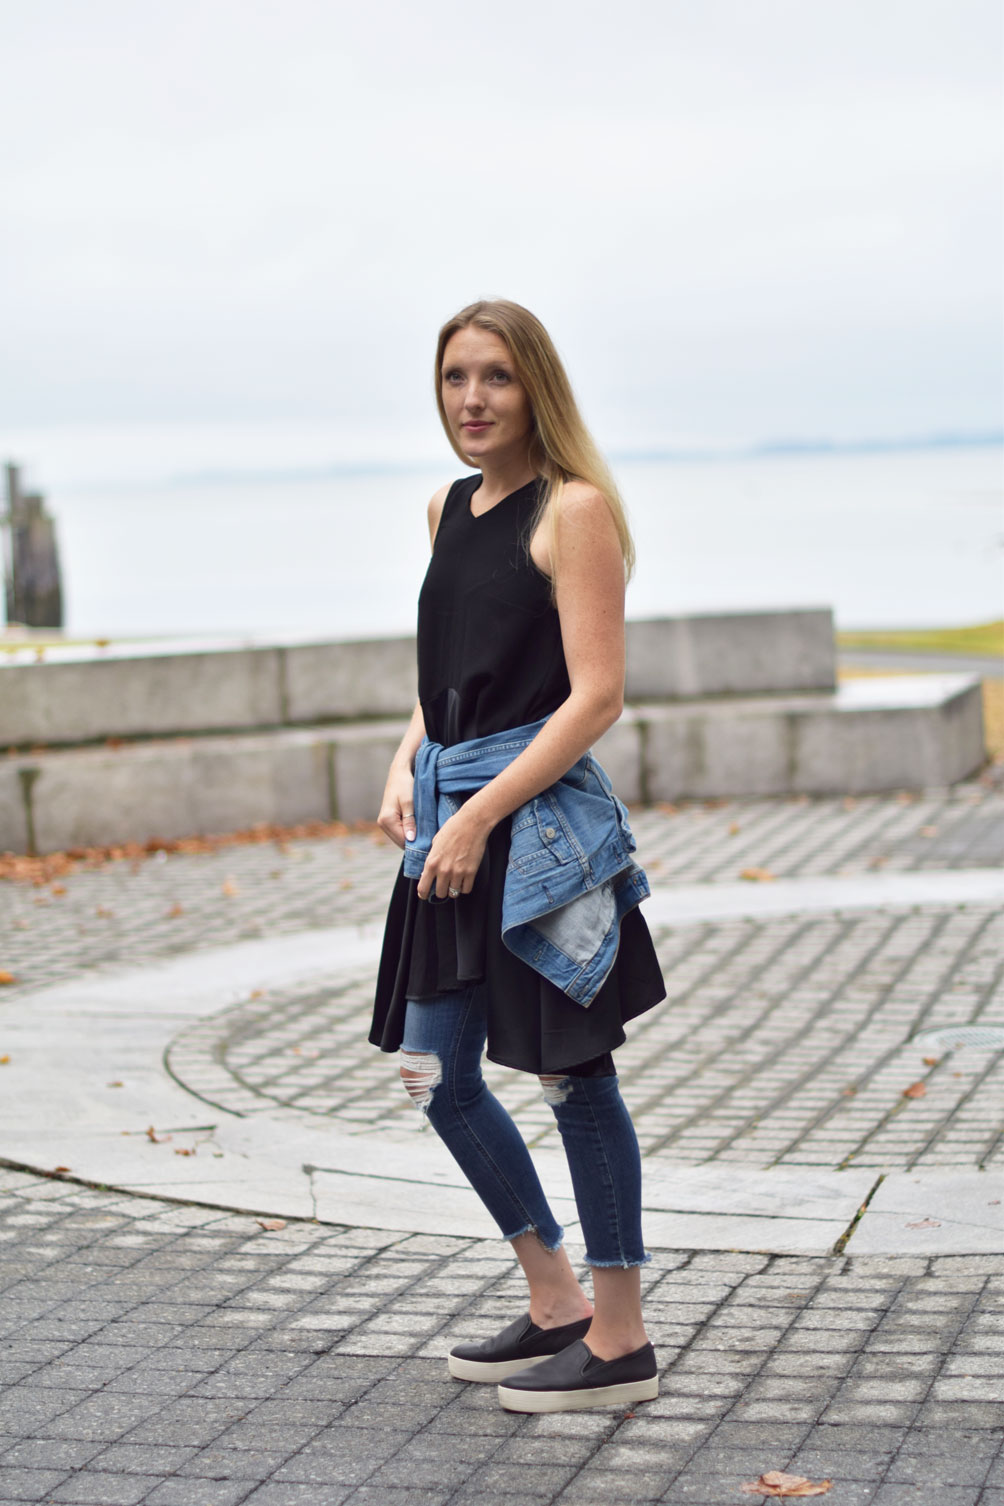 early fall style inspiration from fashion blogger Leslie Musser of one brass fox with distressed layered denim and a swing dress